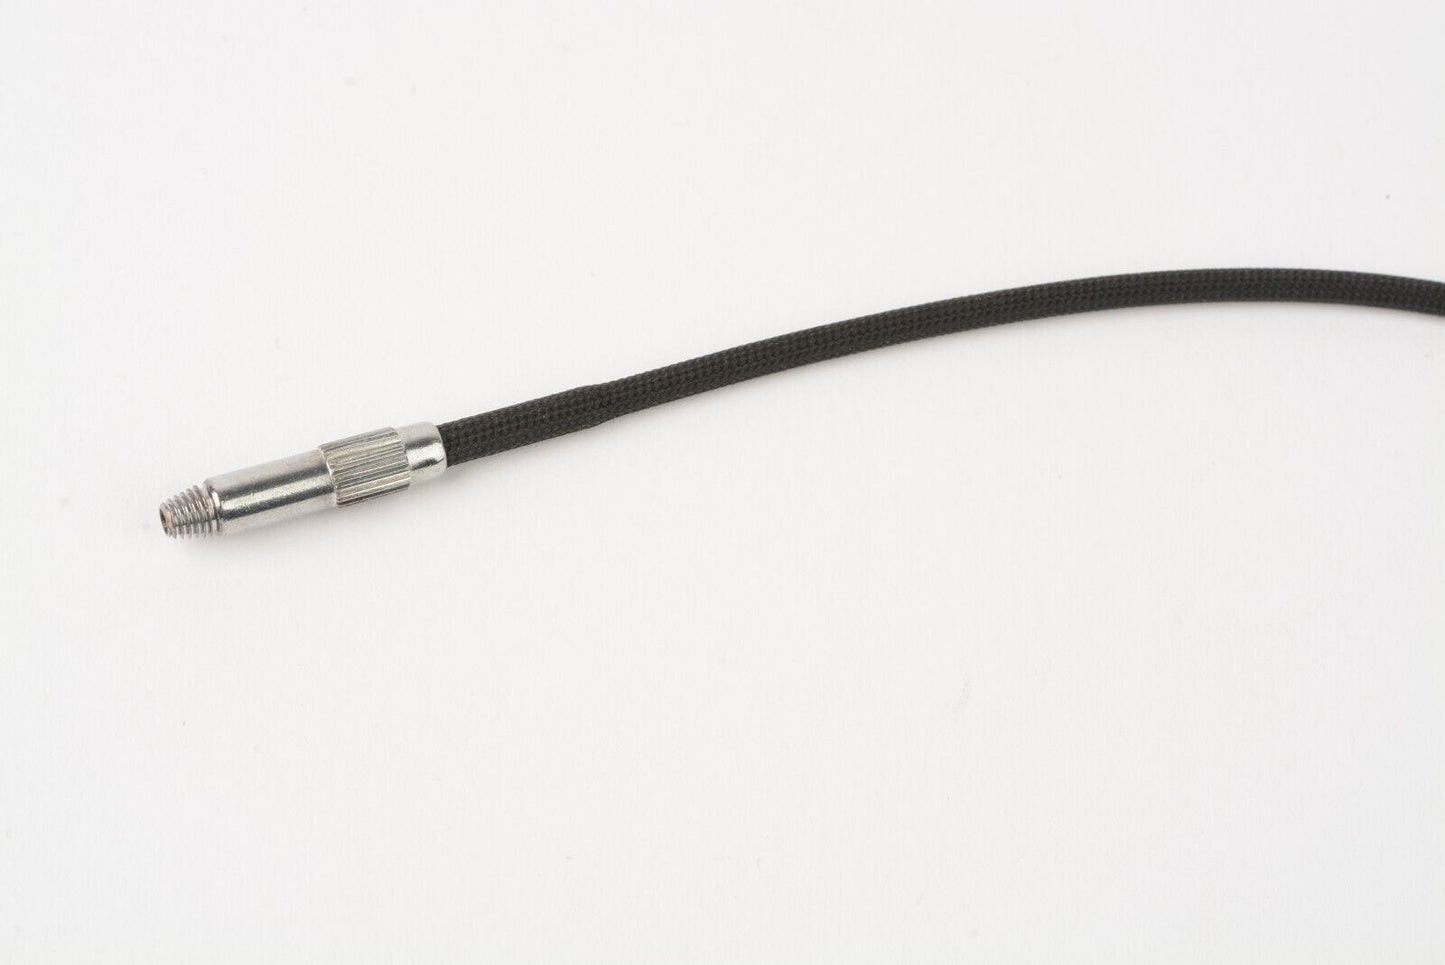 EXC++ ~12" LOCKING CABLE RELEASE, VERY SMOOTH, NICE!! MADE IN GERMANY